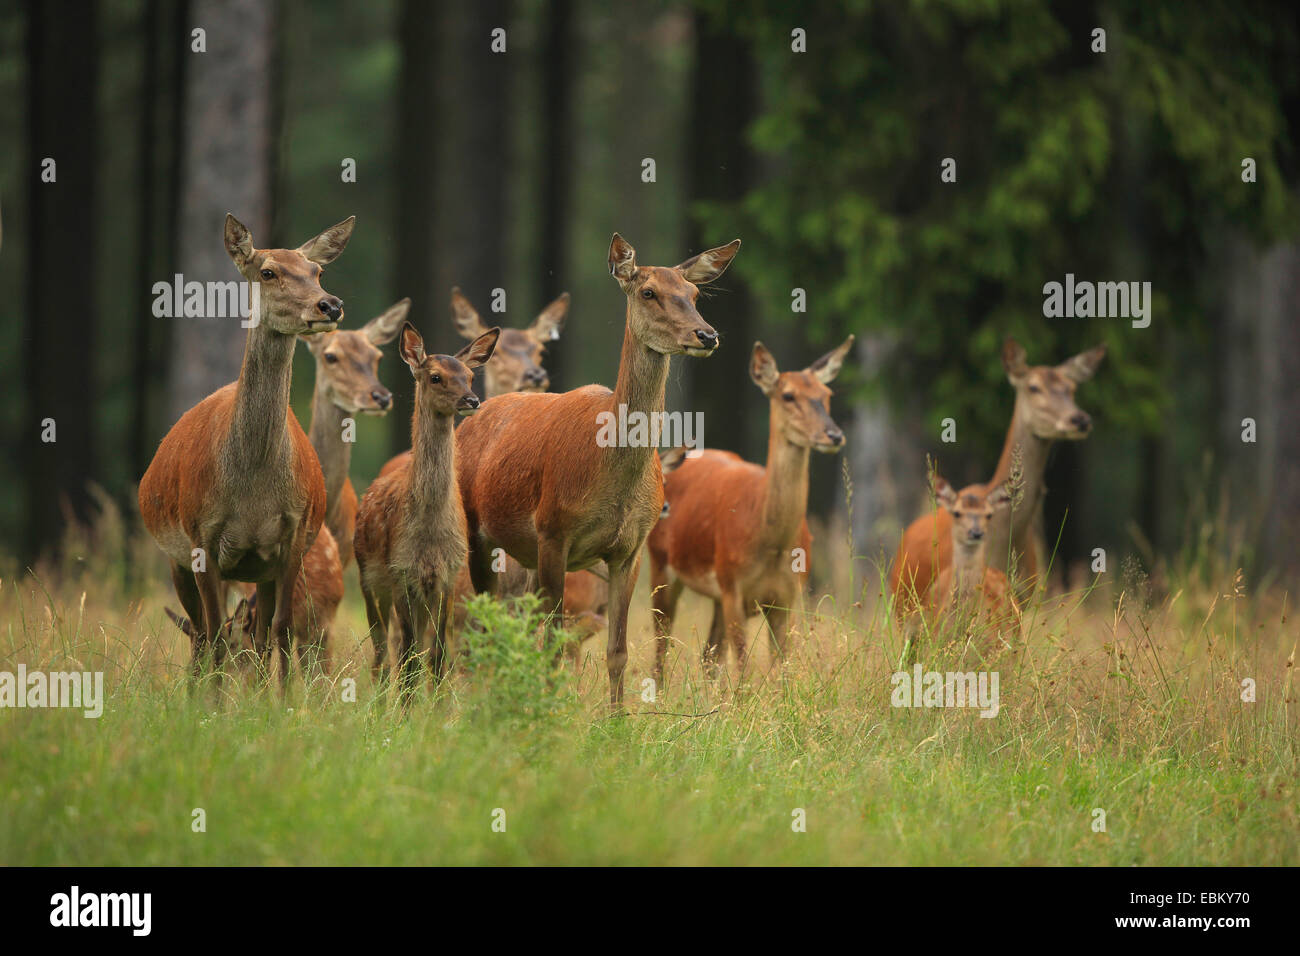 red deer (Cervus elaphus), hinds with fawns, Germany, Erz Mountains Stock Photo